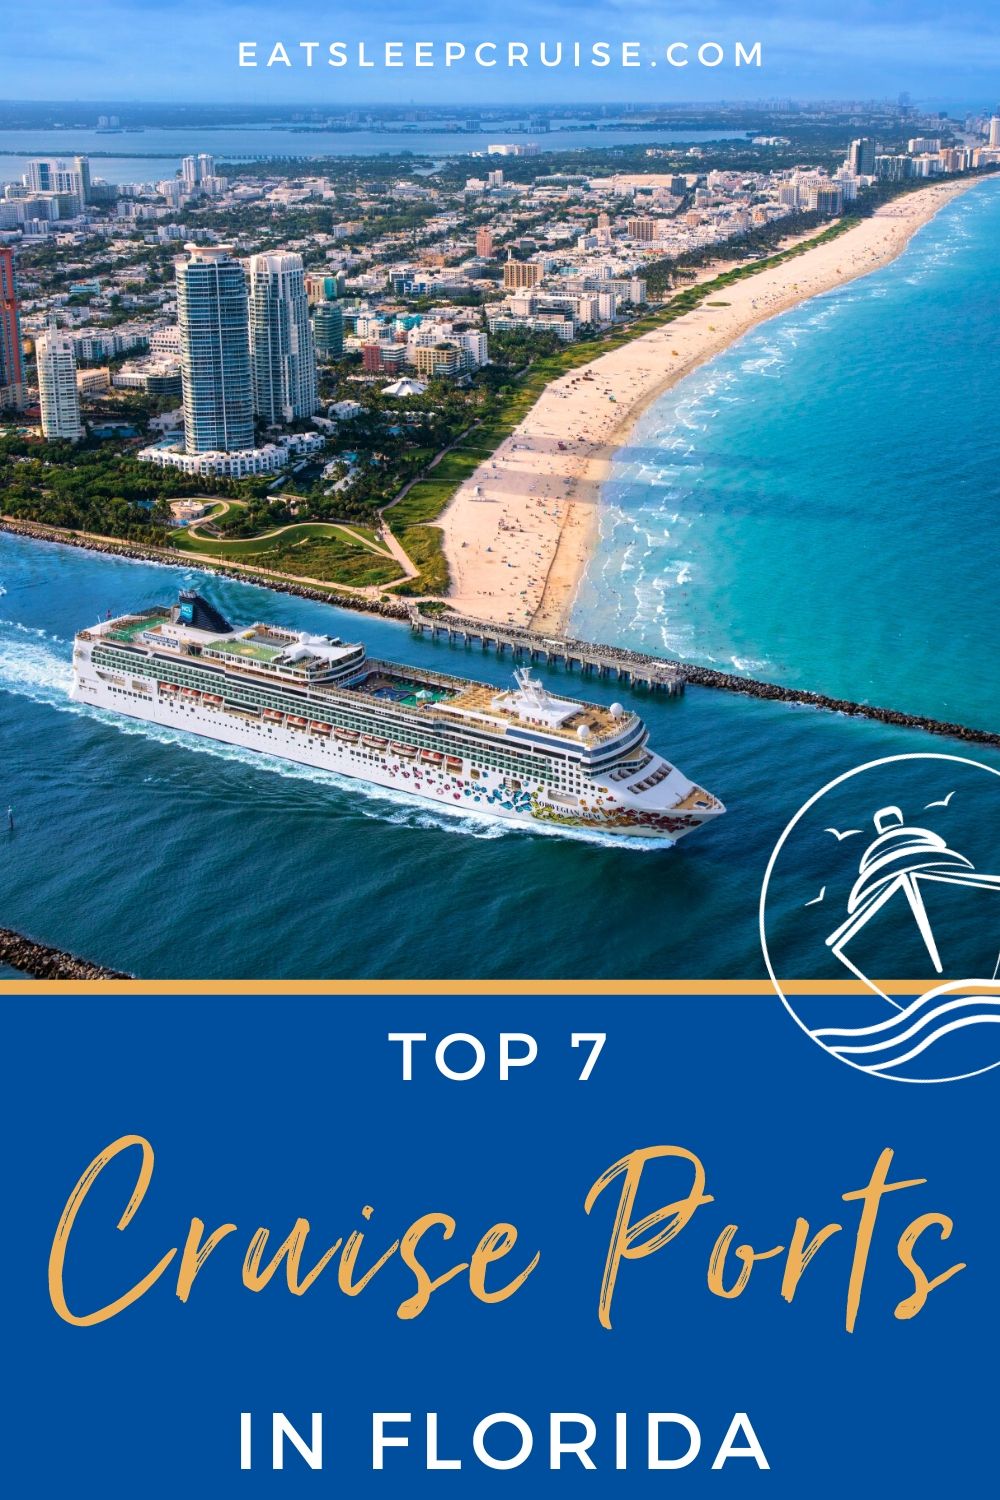 Everything You Need to Know About Cruise Ports in Florida